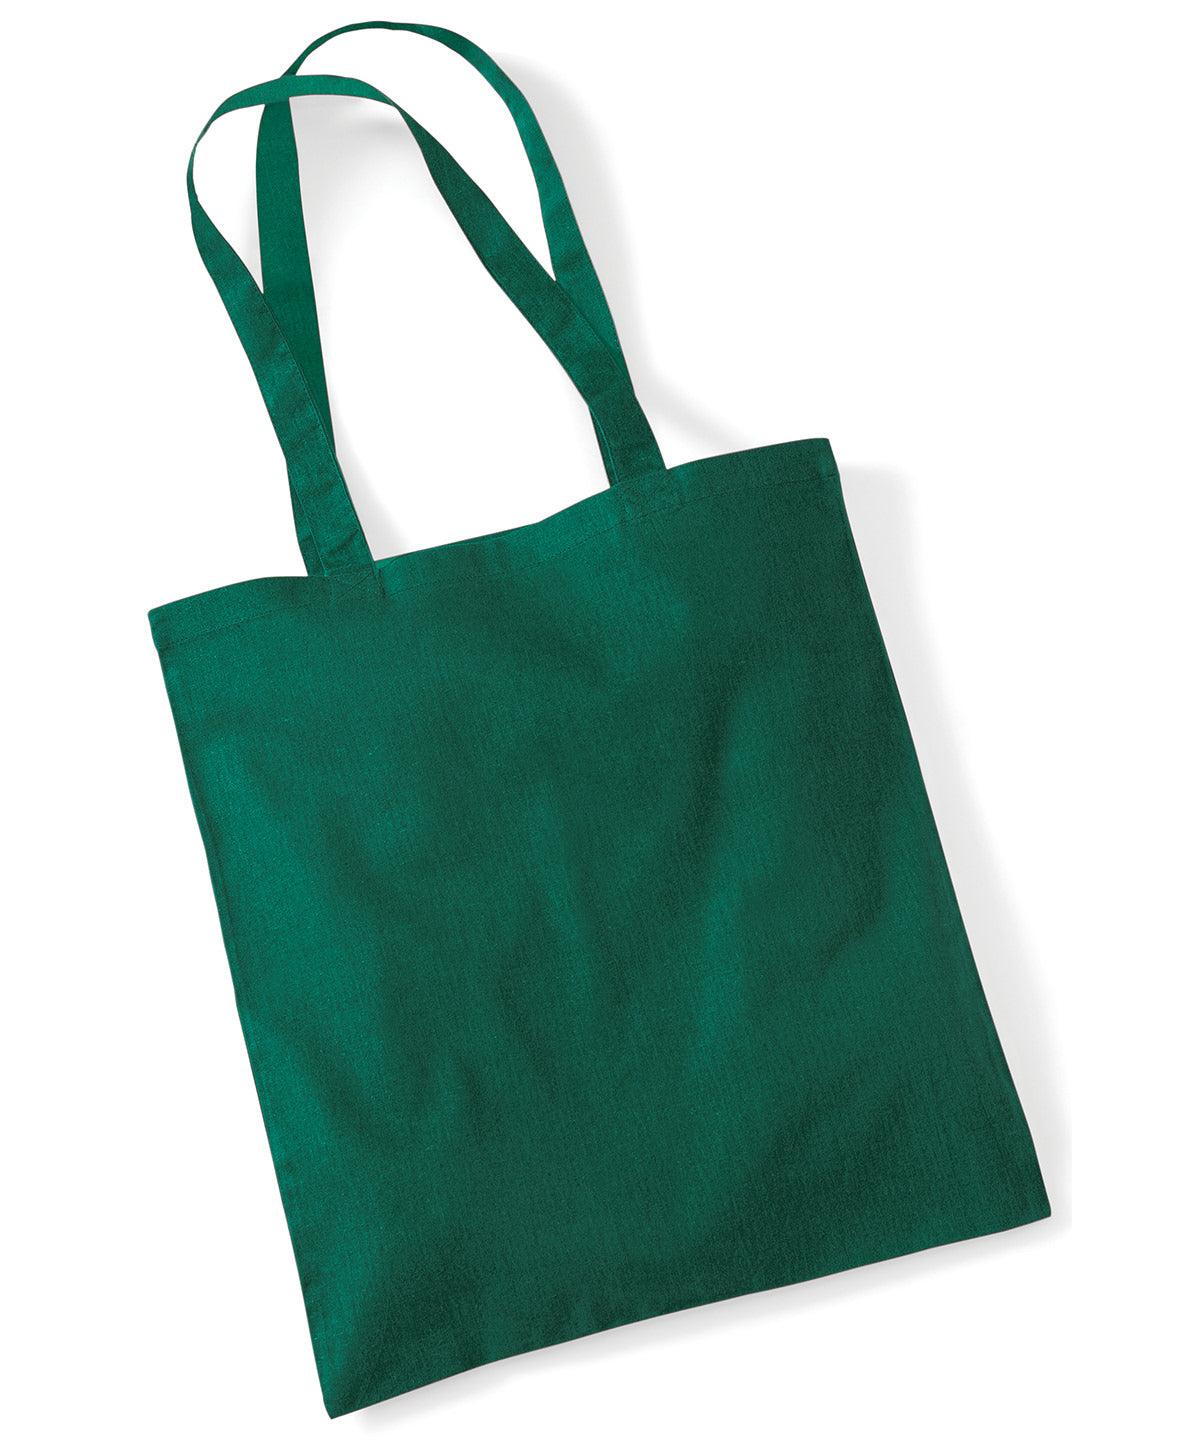 Bottle Green - Bag for life - long handles Bags Westford Mill Bags & Luggage, Crafting, Must Haves, Rebrandable Schoolwear Centres